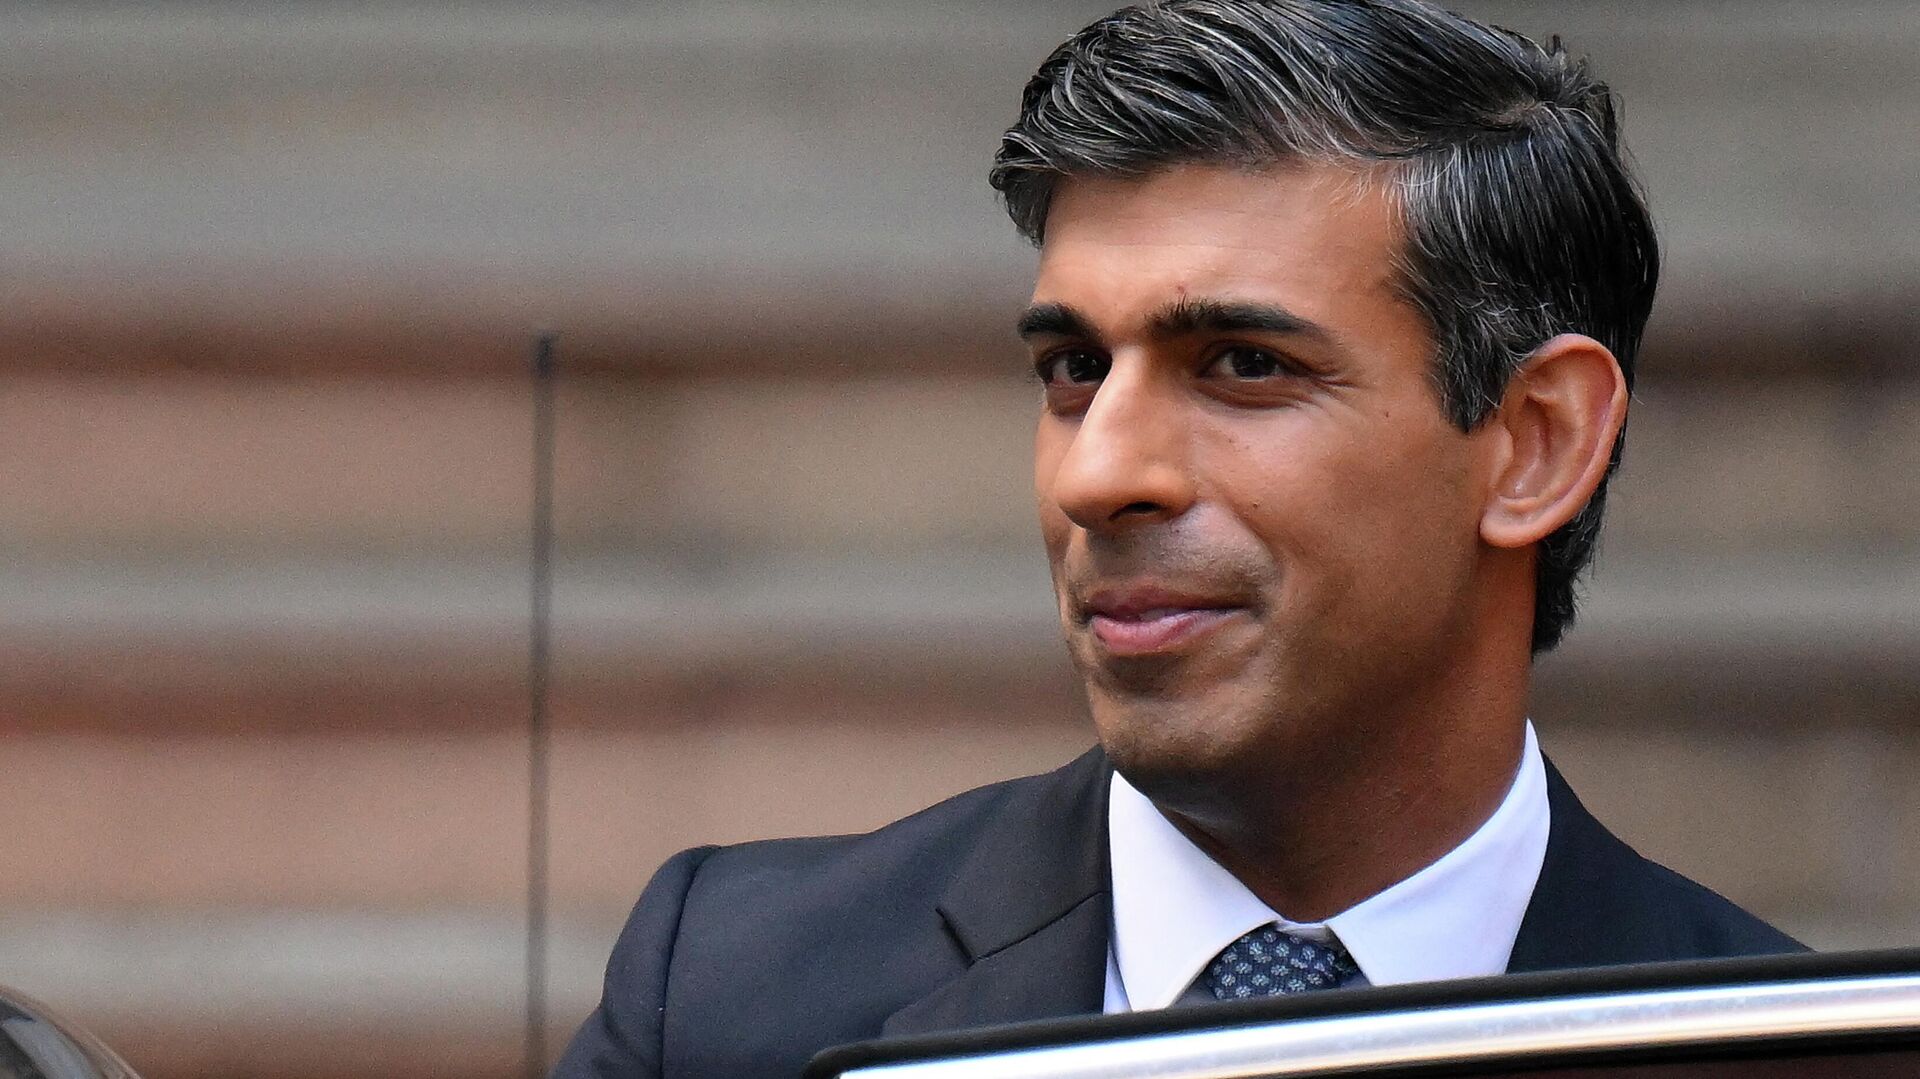 Rishi Sunak enters a car as he leaves from Conservative Party Headquarters in central London having been announced as the winner of the Conservative Party leadership contest, on October 24, 2022. - Sputnik International, 1920, 25.05.2023